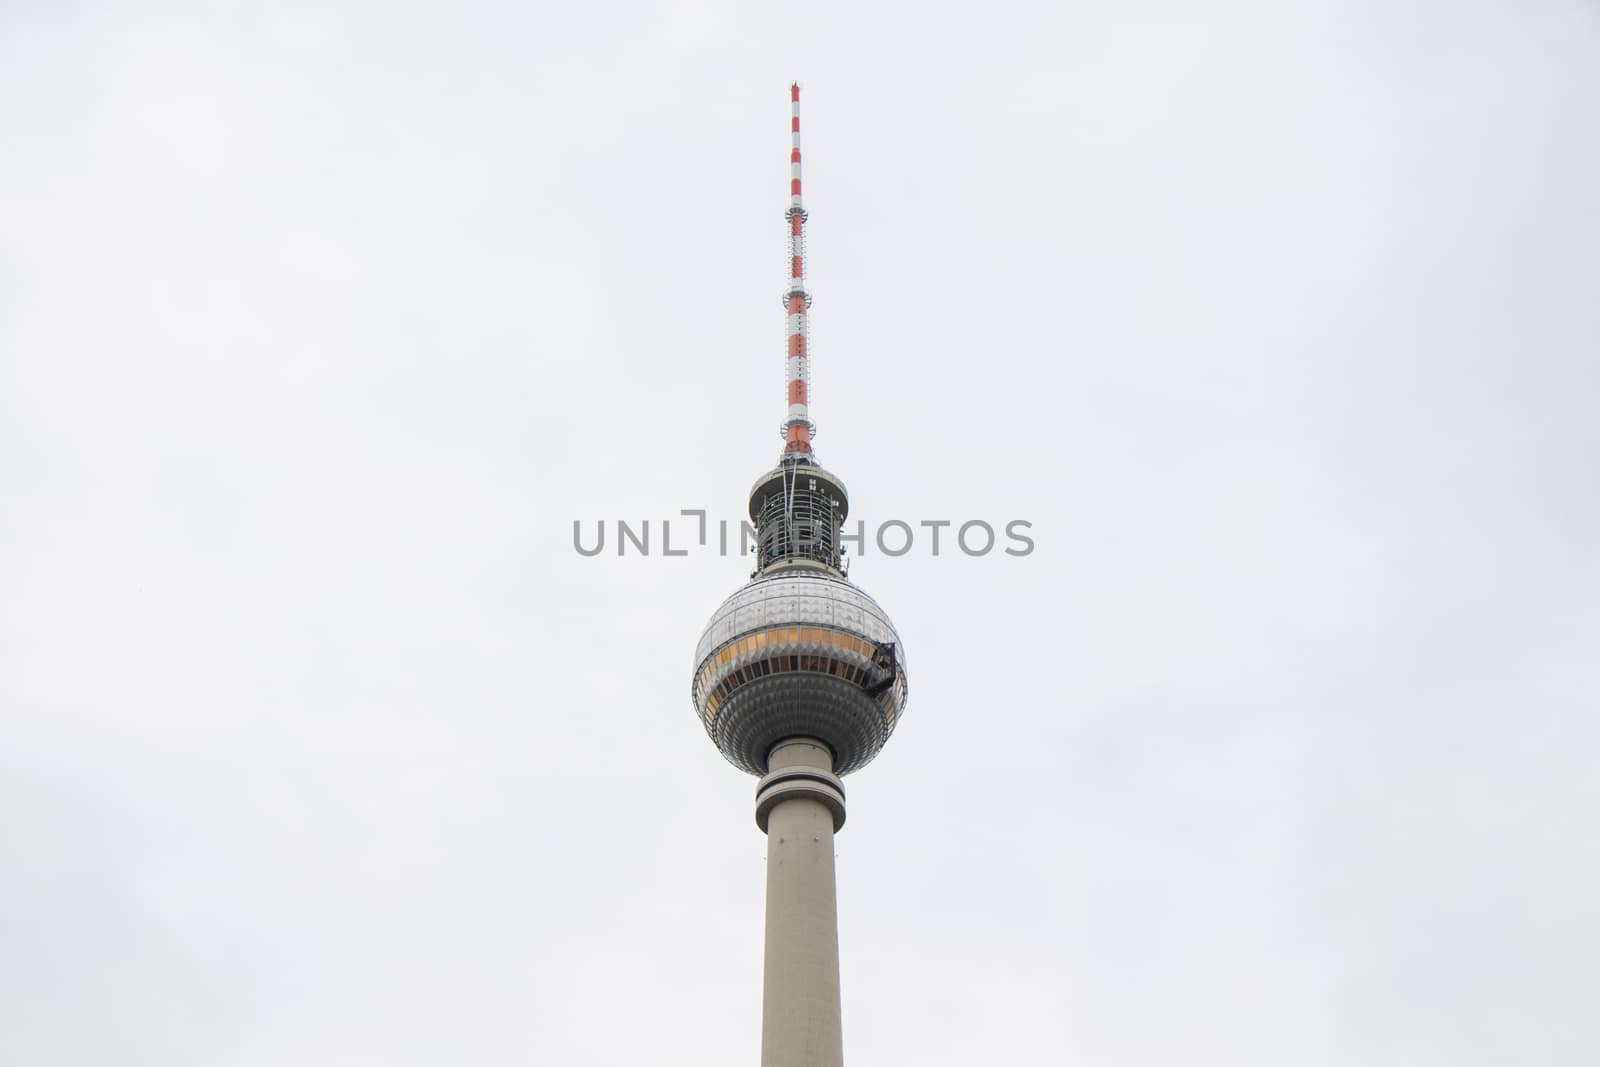 Berlin TV tower on the white background. by Taidundua